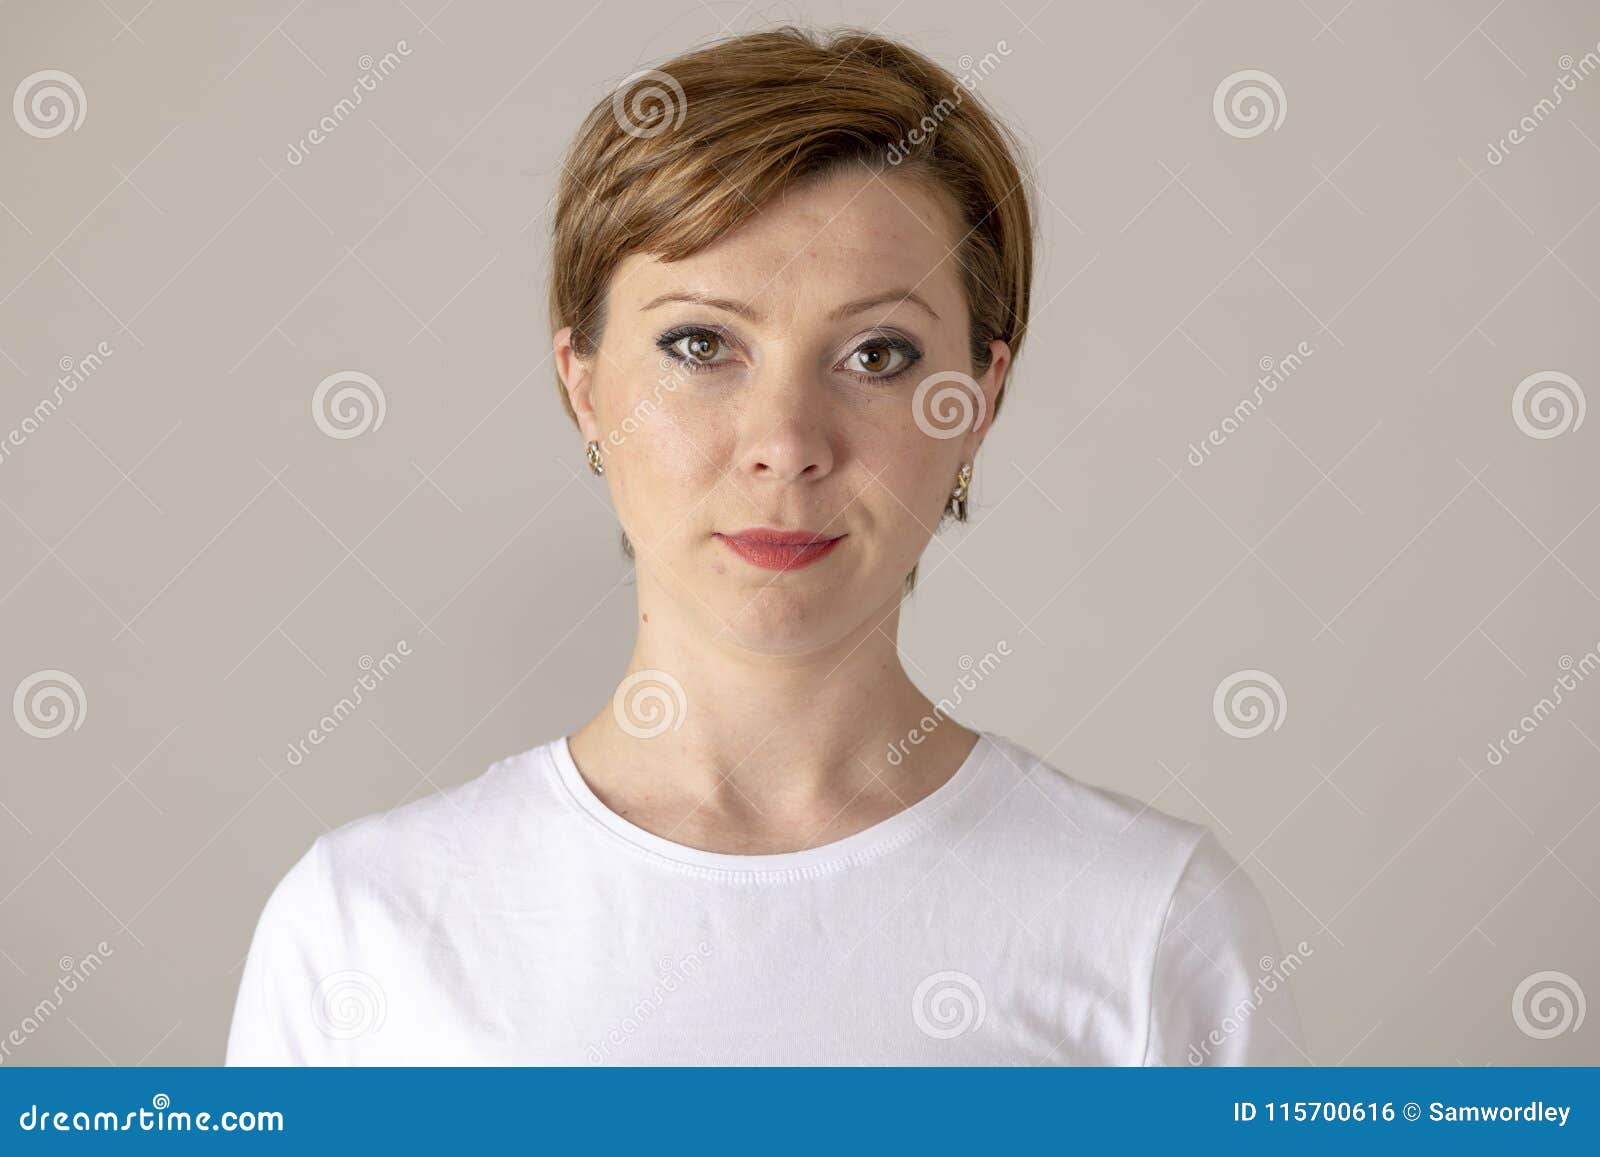 Minimal waist up portrait of smiling mature woman wearing neutral